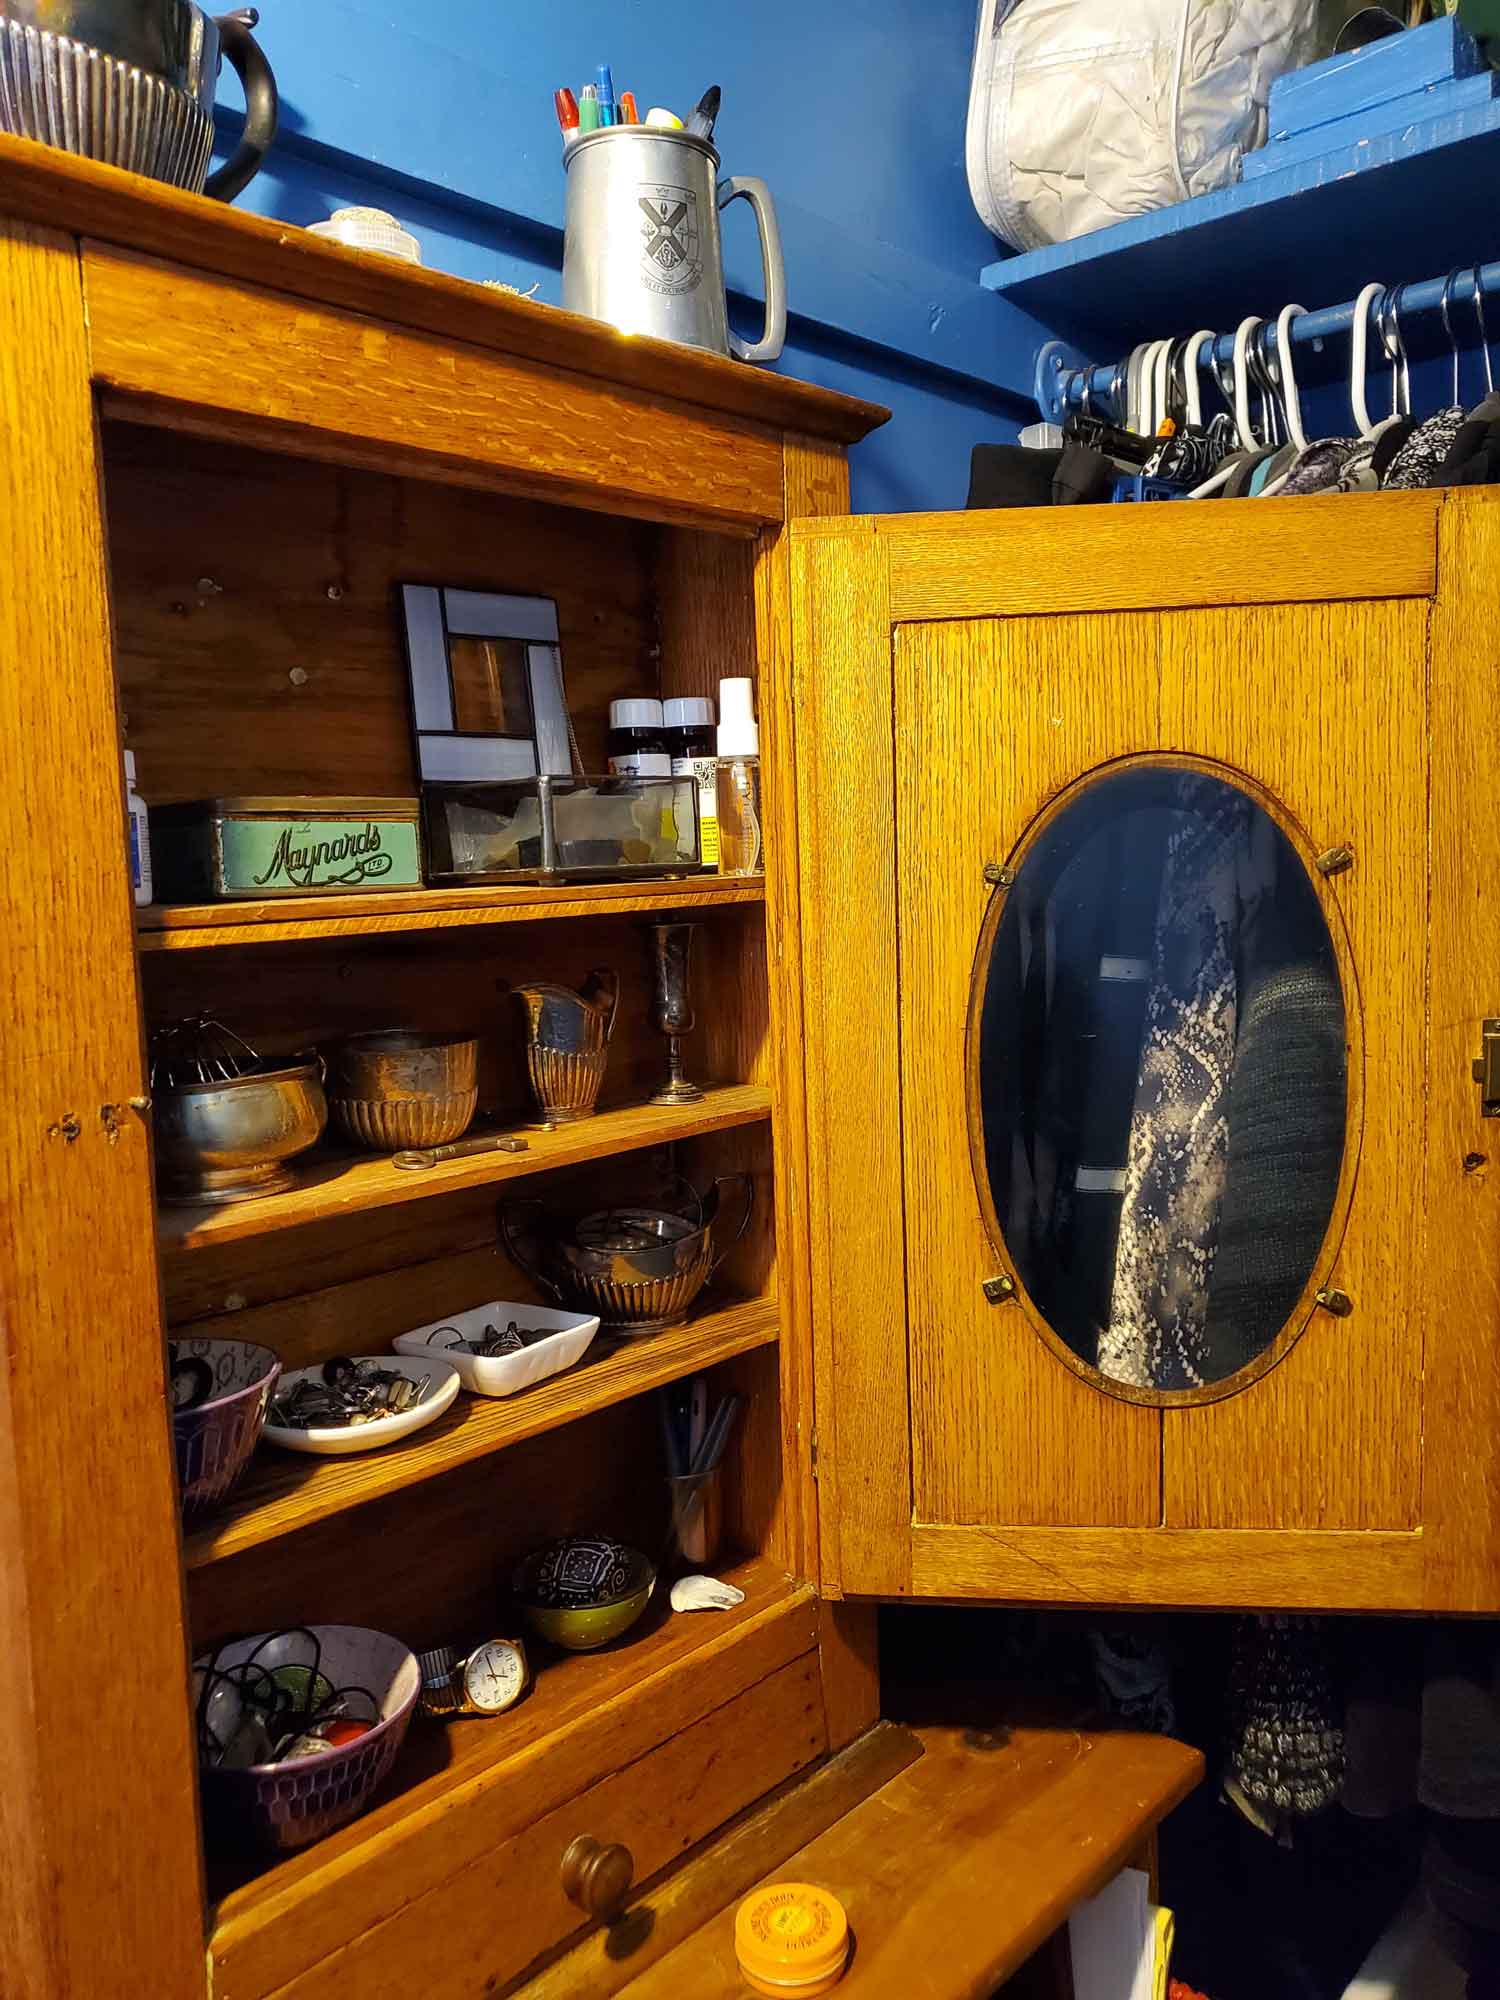 Focus on the inside of the cabinet with items neatly sorted